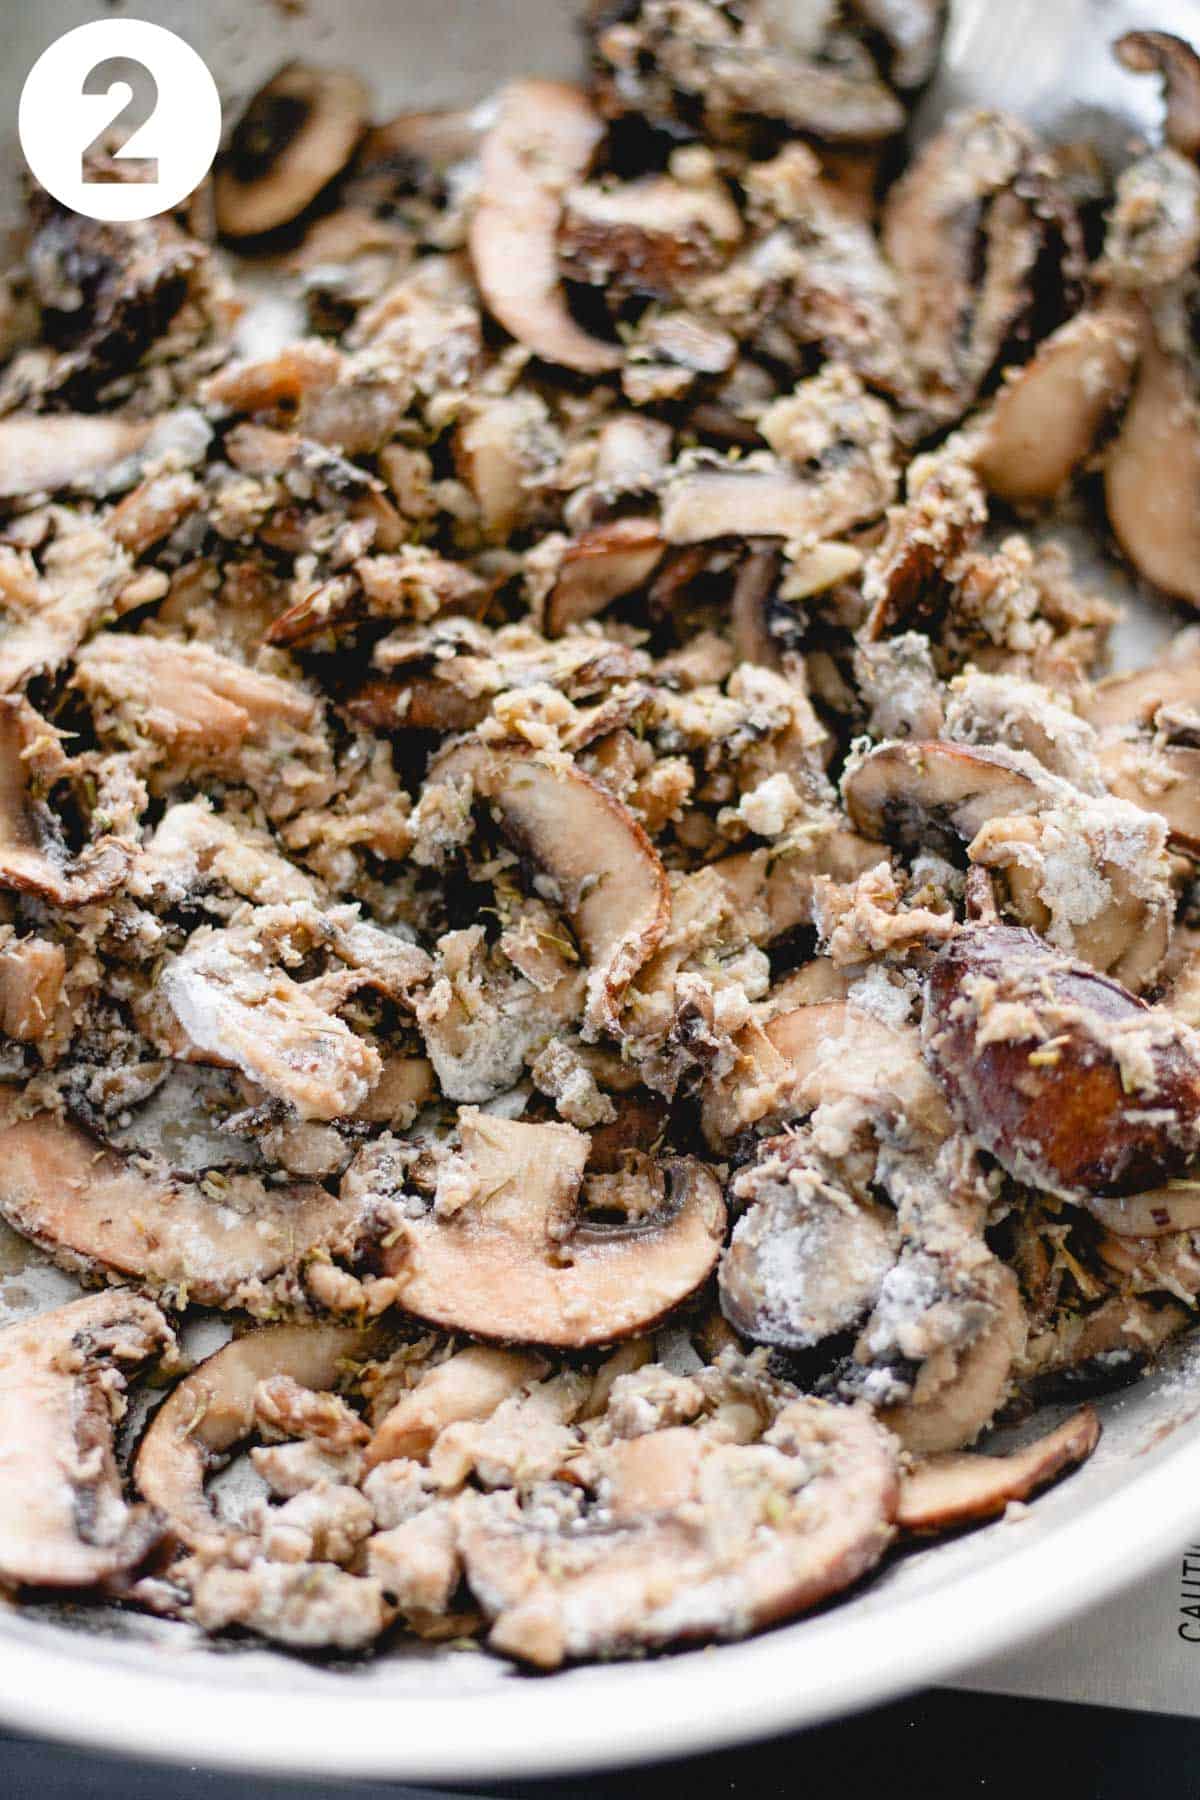 Sliced mushrooms coated with flour in a skillet.